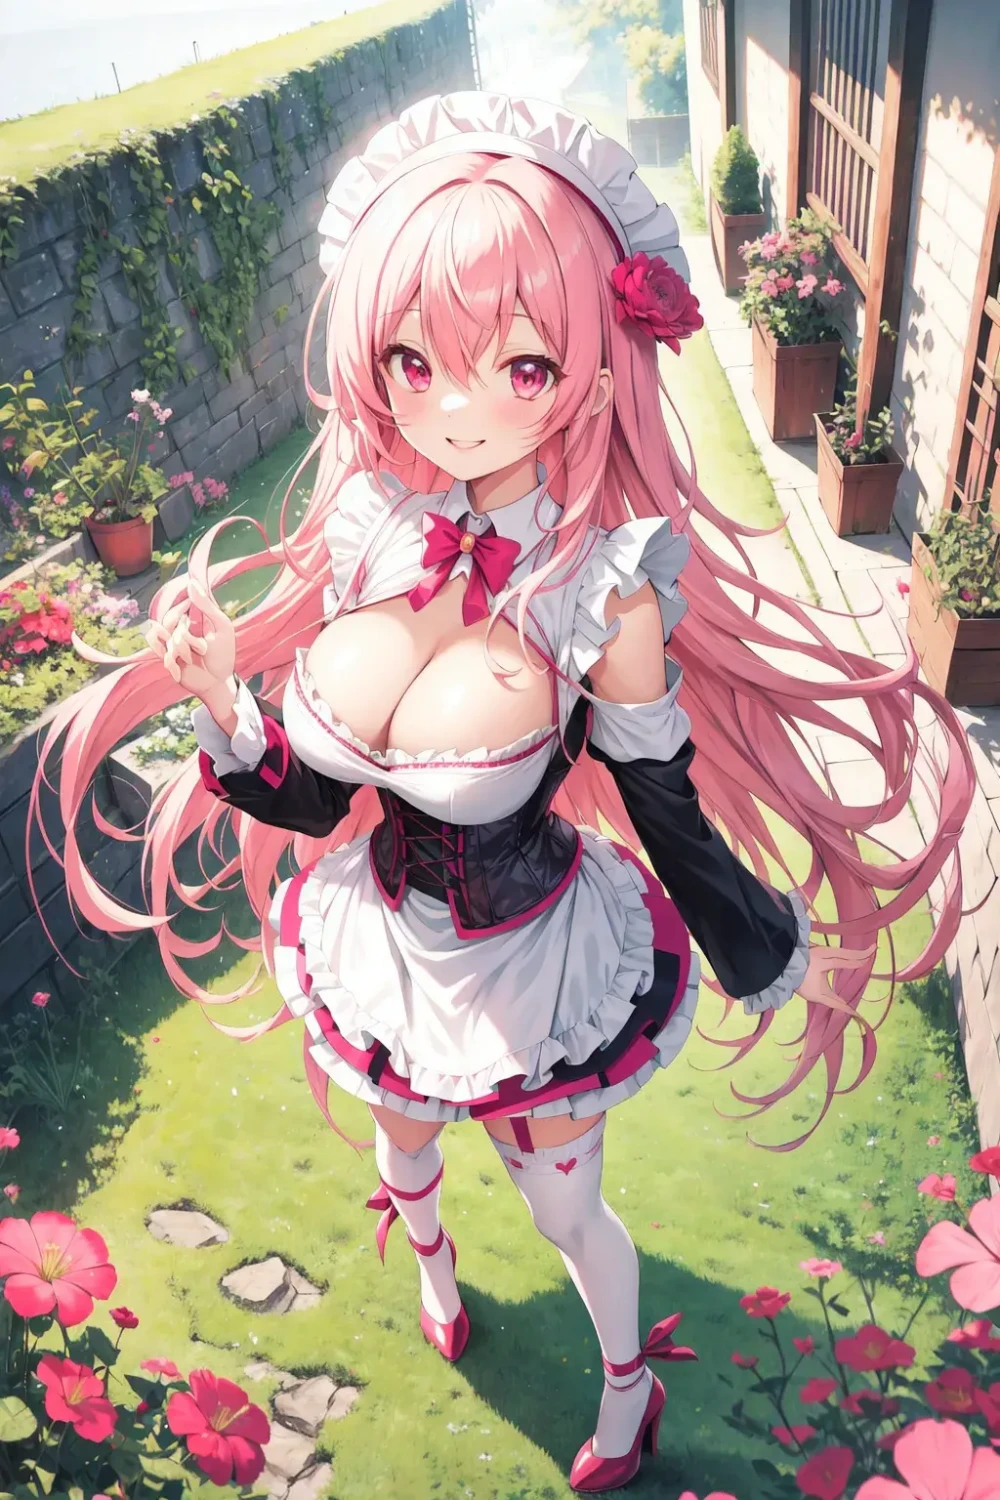 maid-anime-style-all-ages-49